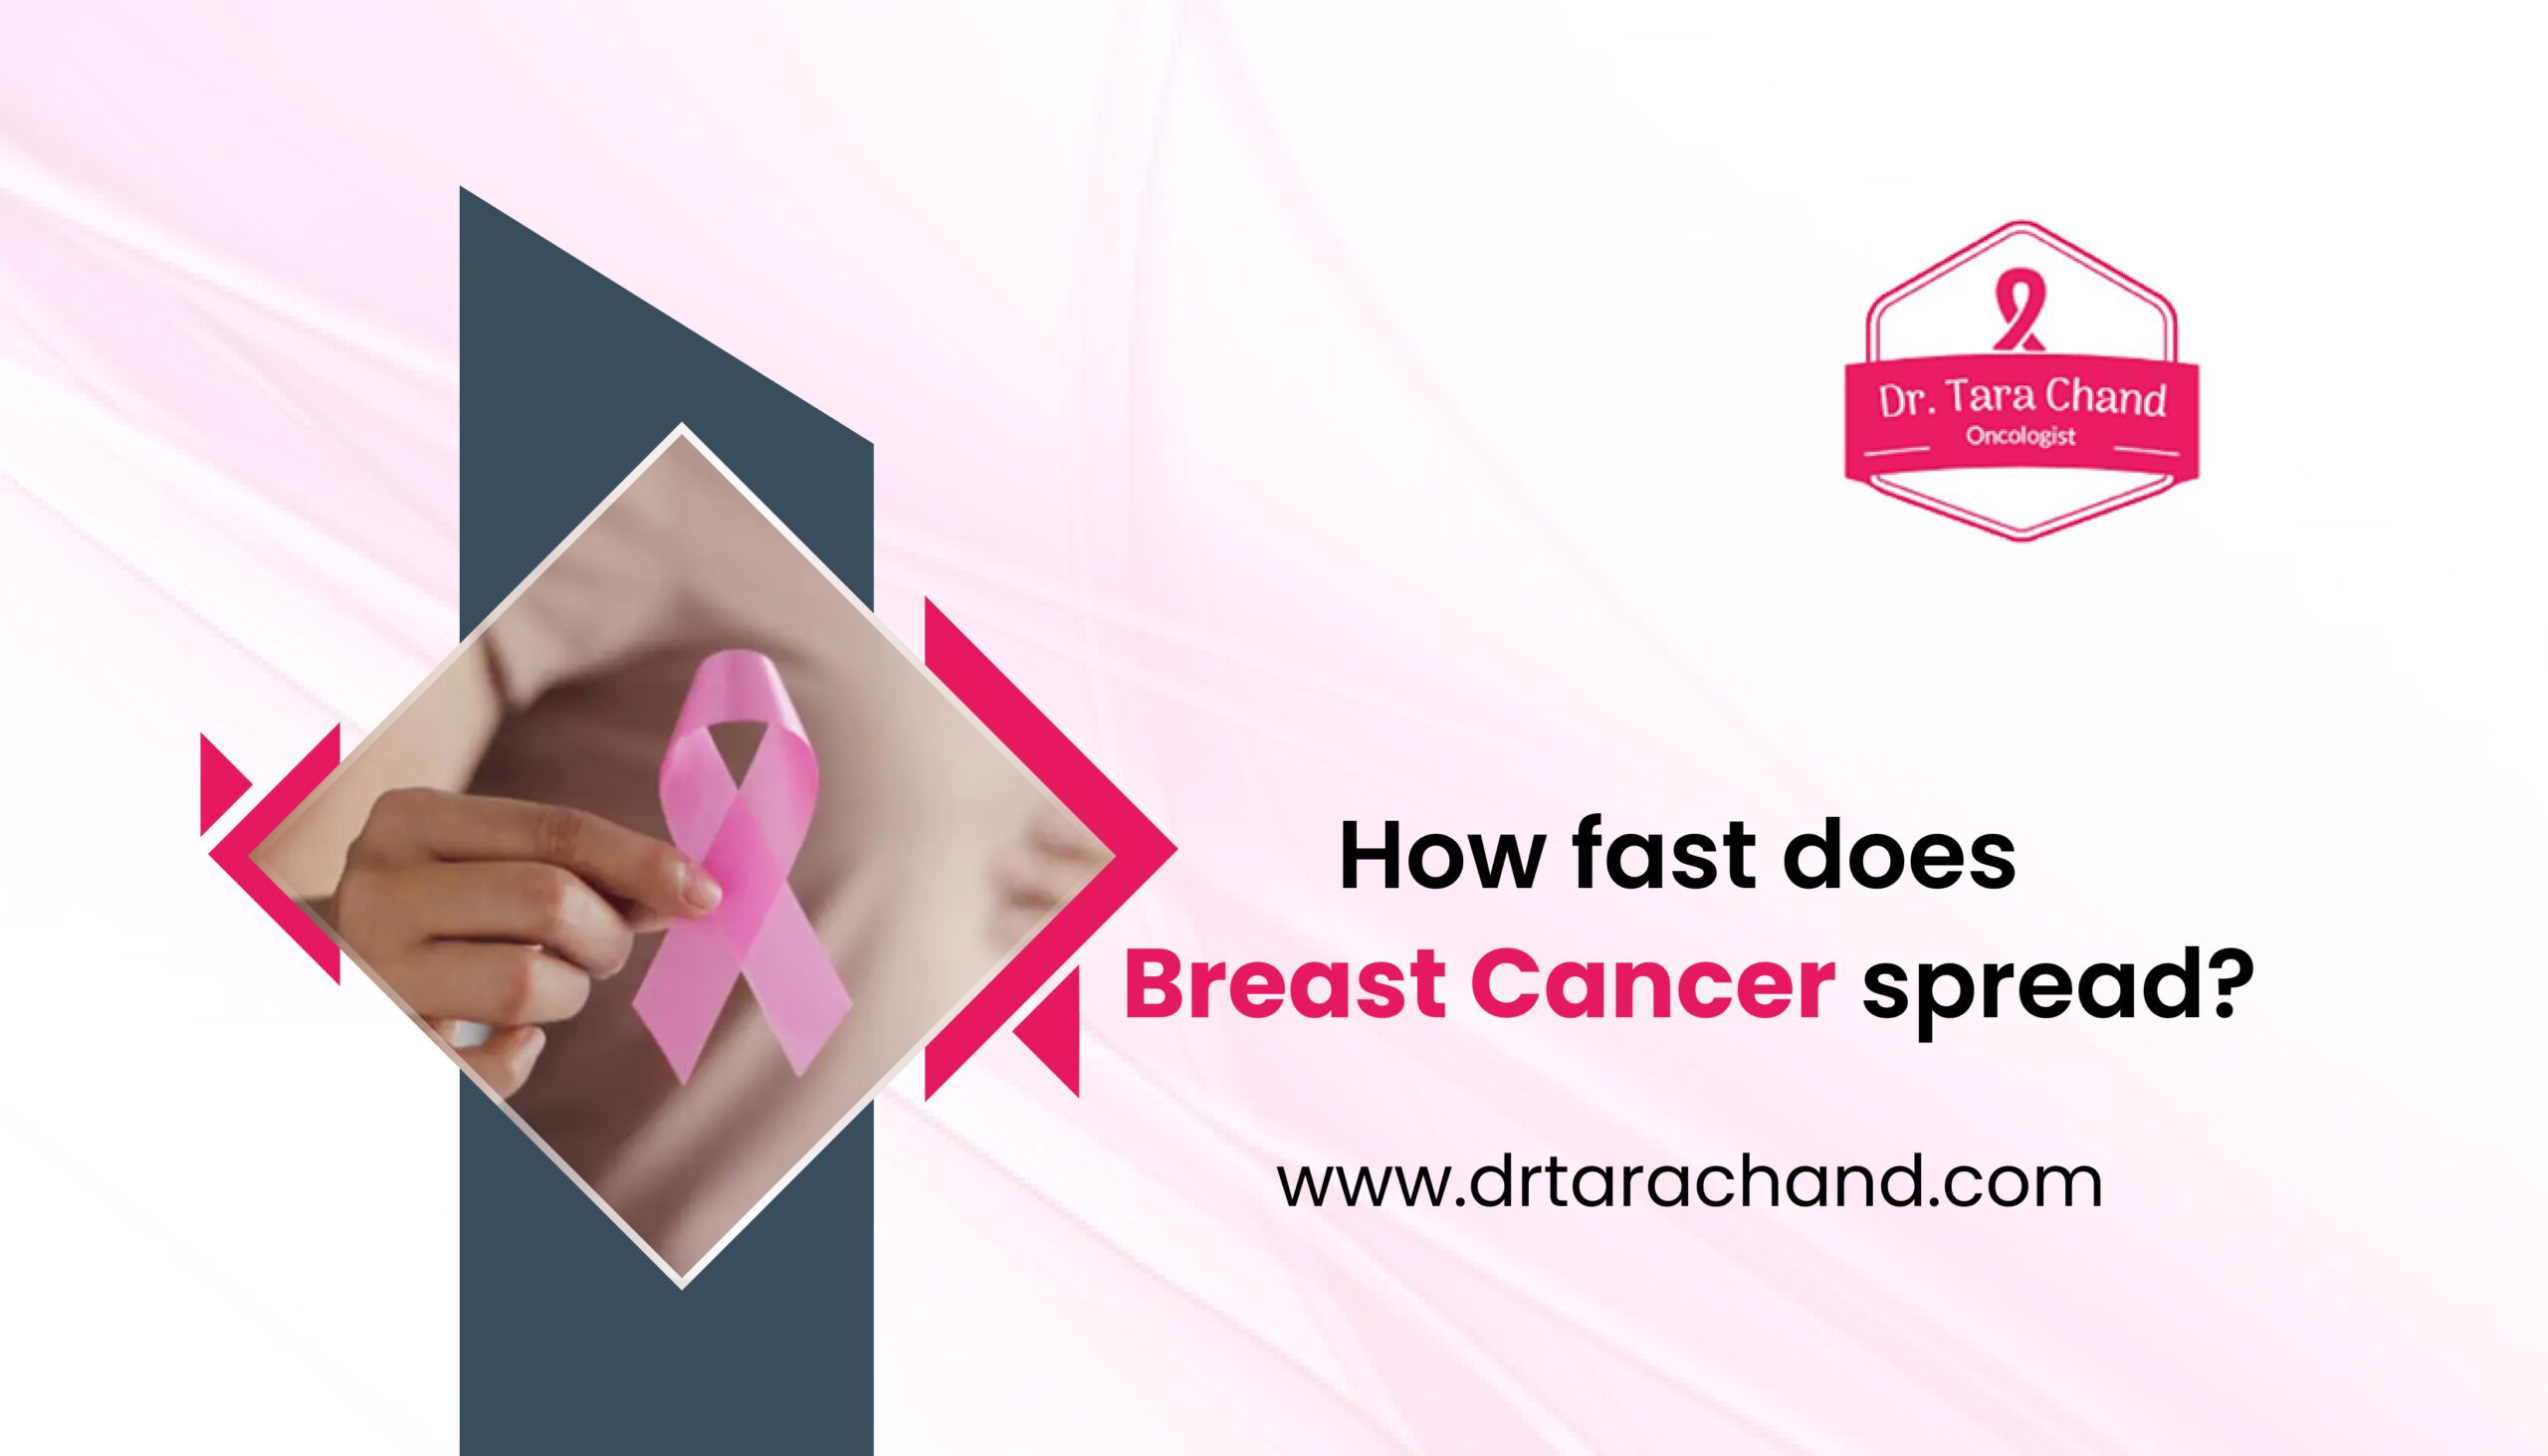 How fast does Breast cancer spread in 2022?